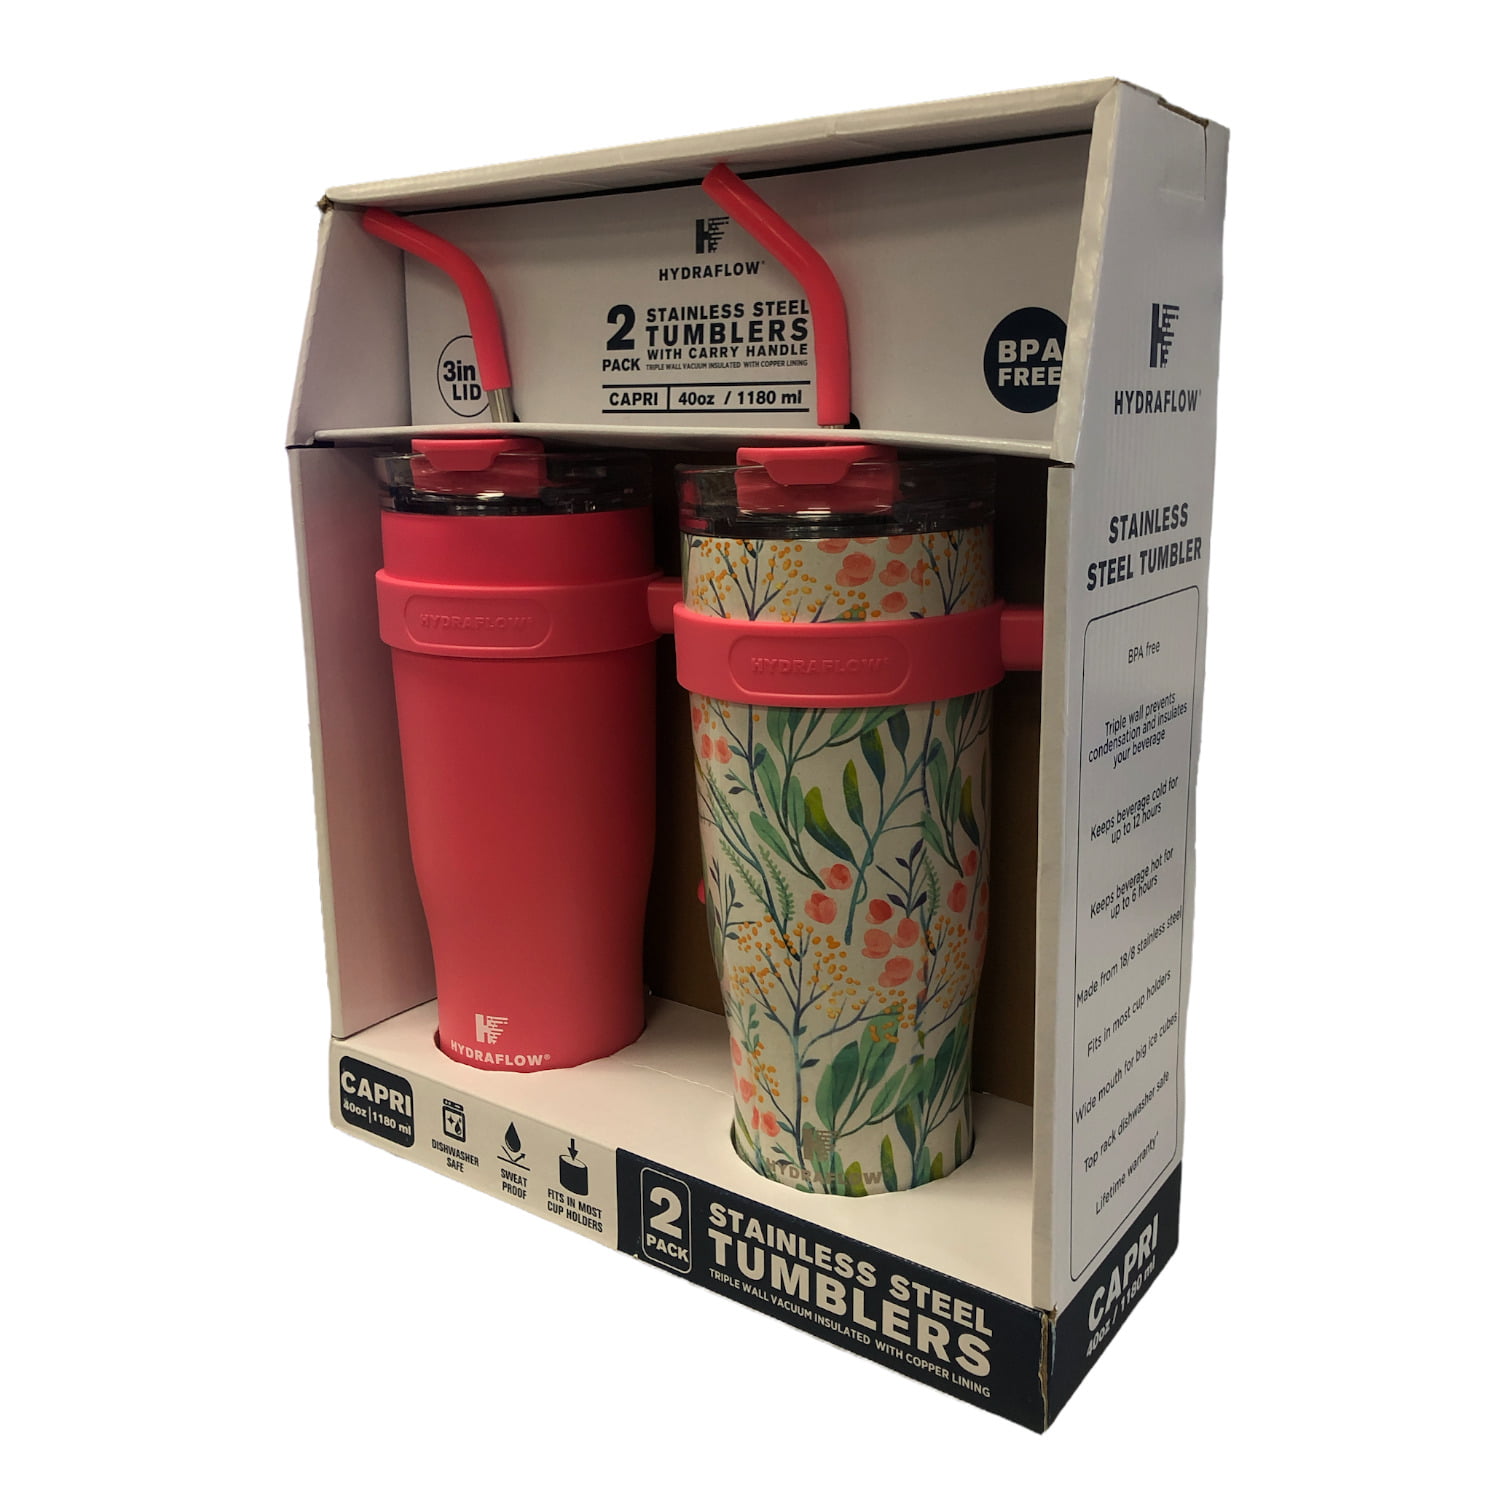 Hydraflow Stainless Steel Tumblers with Carry Handle 40 oz 2 pack